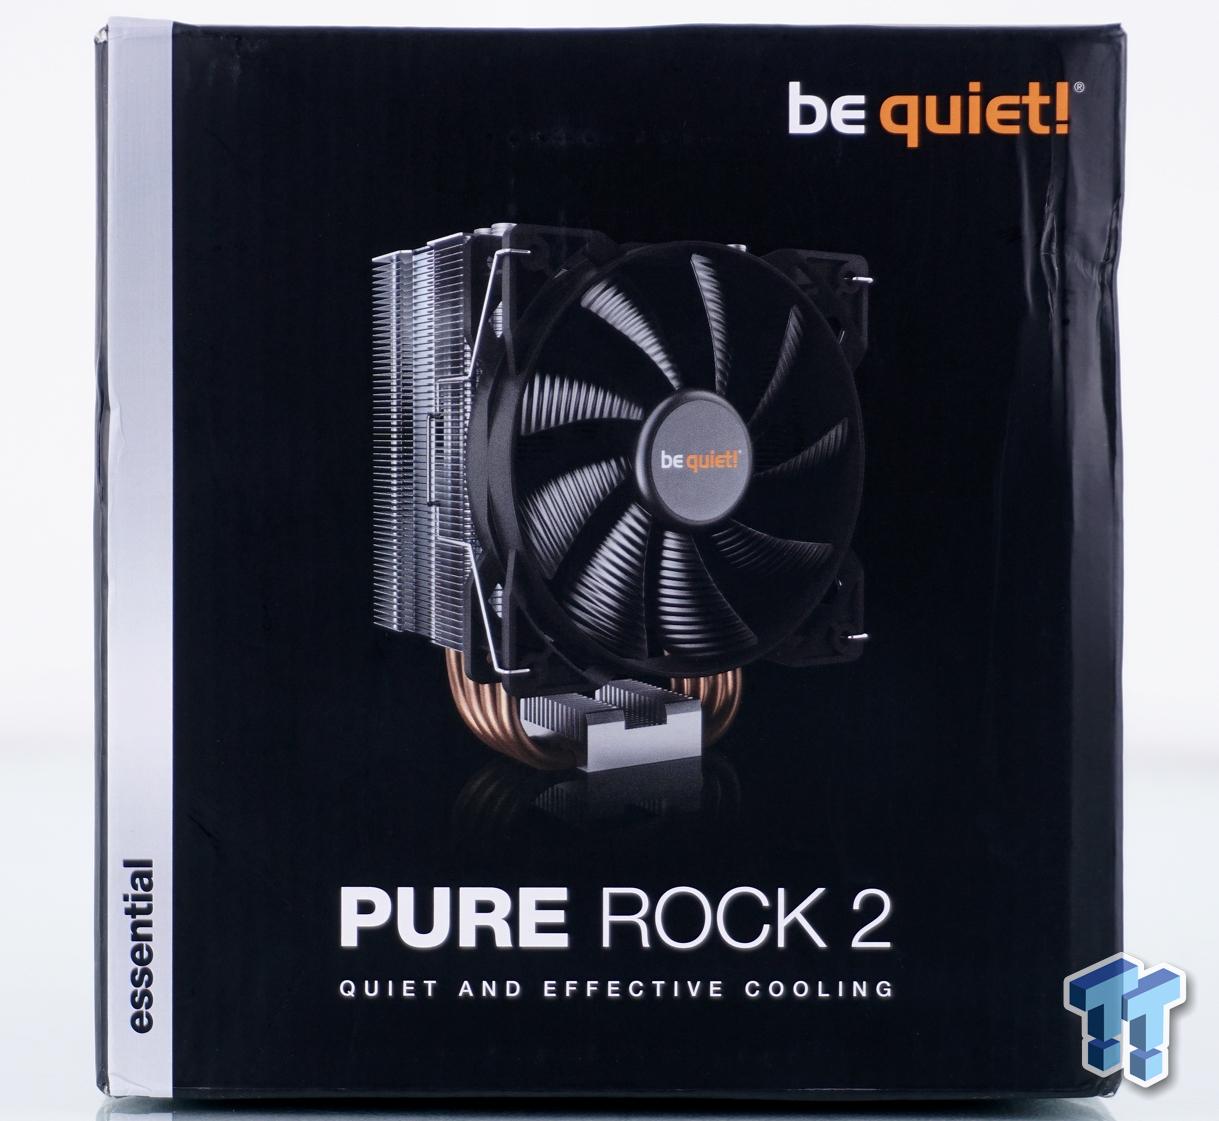 be quiet! Pure Rock 2 review